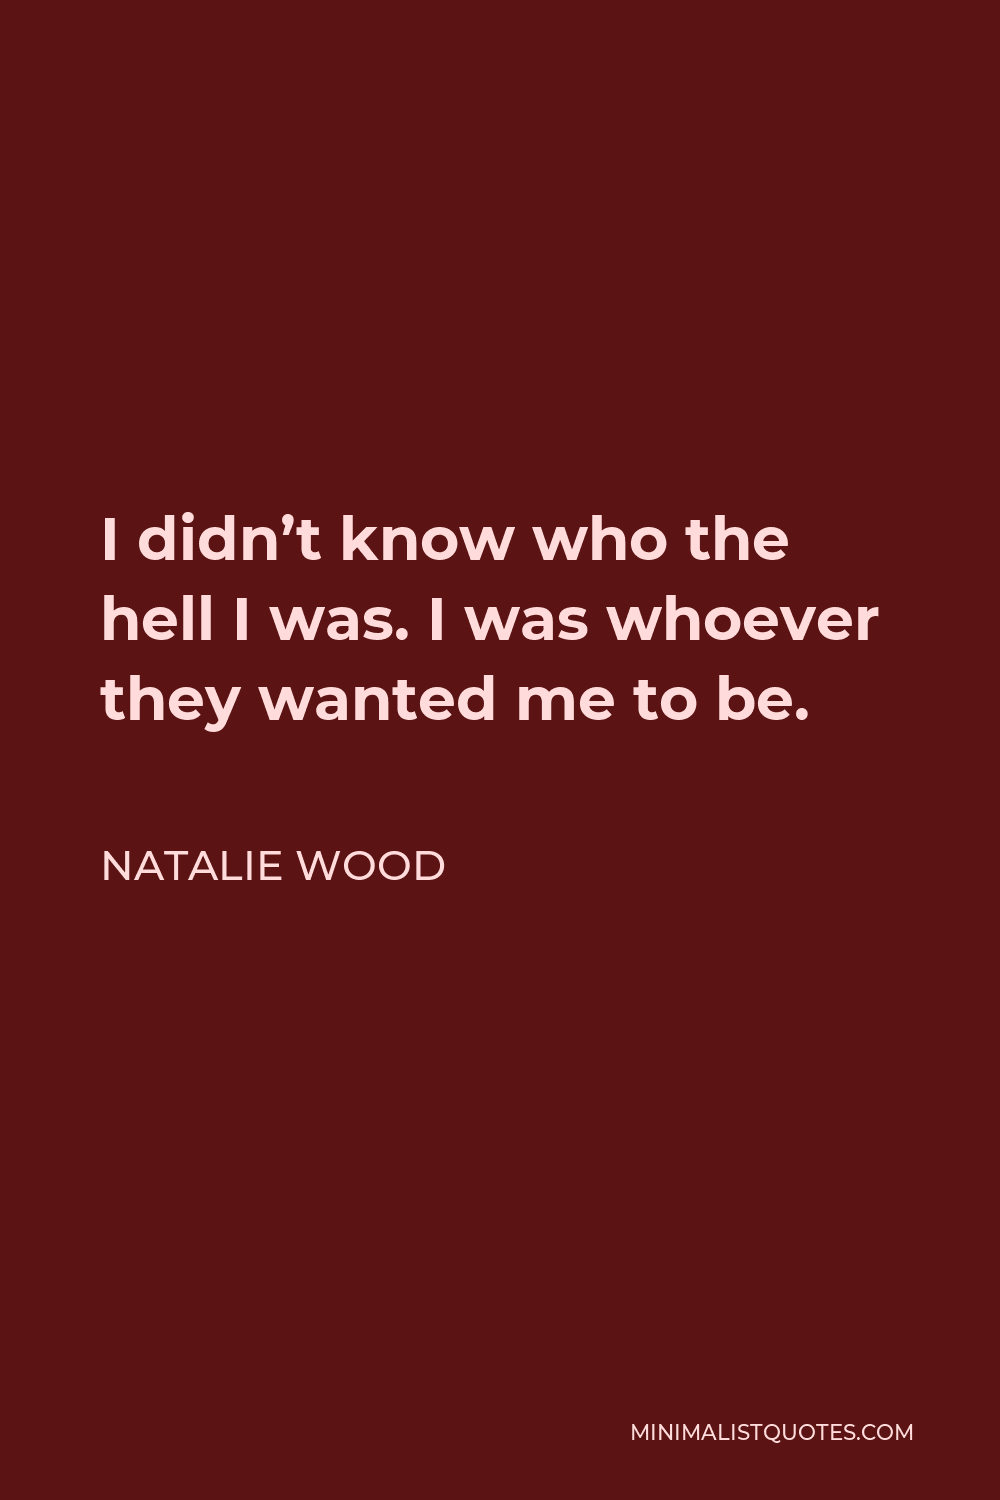 Natalie Wood Quote - I didn’t know who the hell I was. I was whoever they wanted me to be.